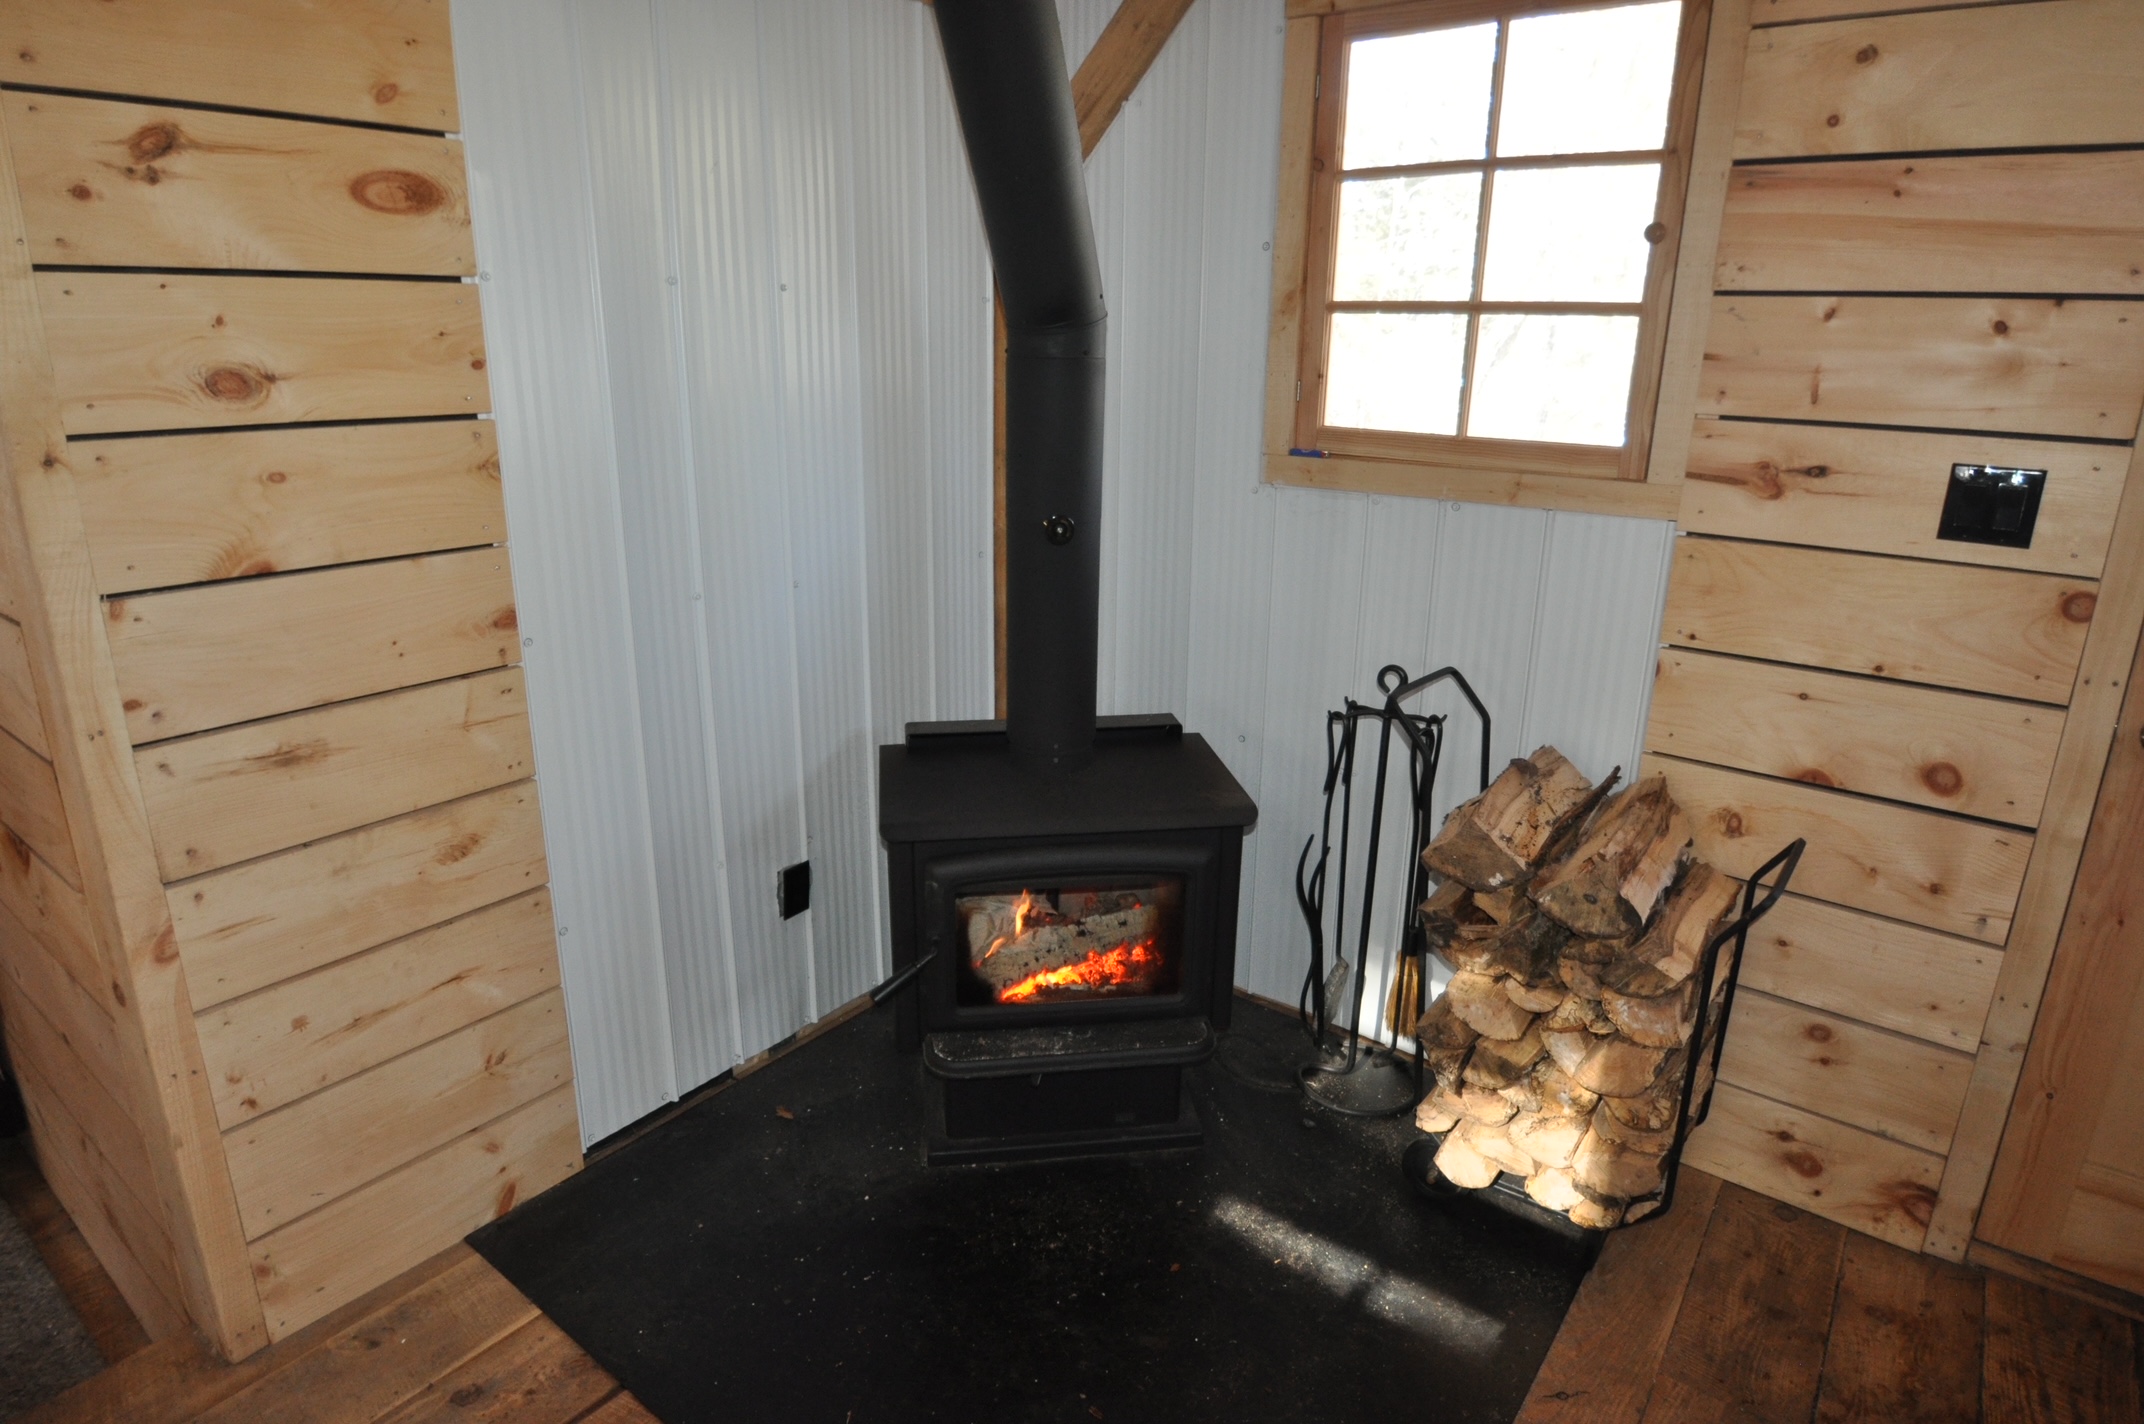 A wood stove in the corner of a cabin living area.